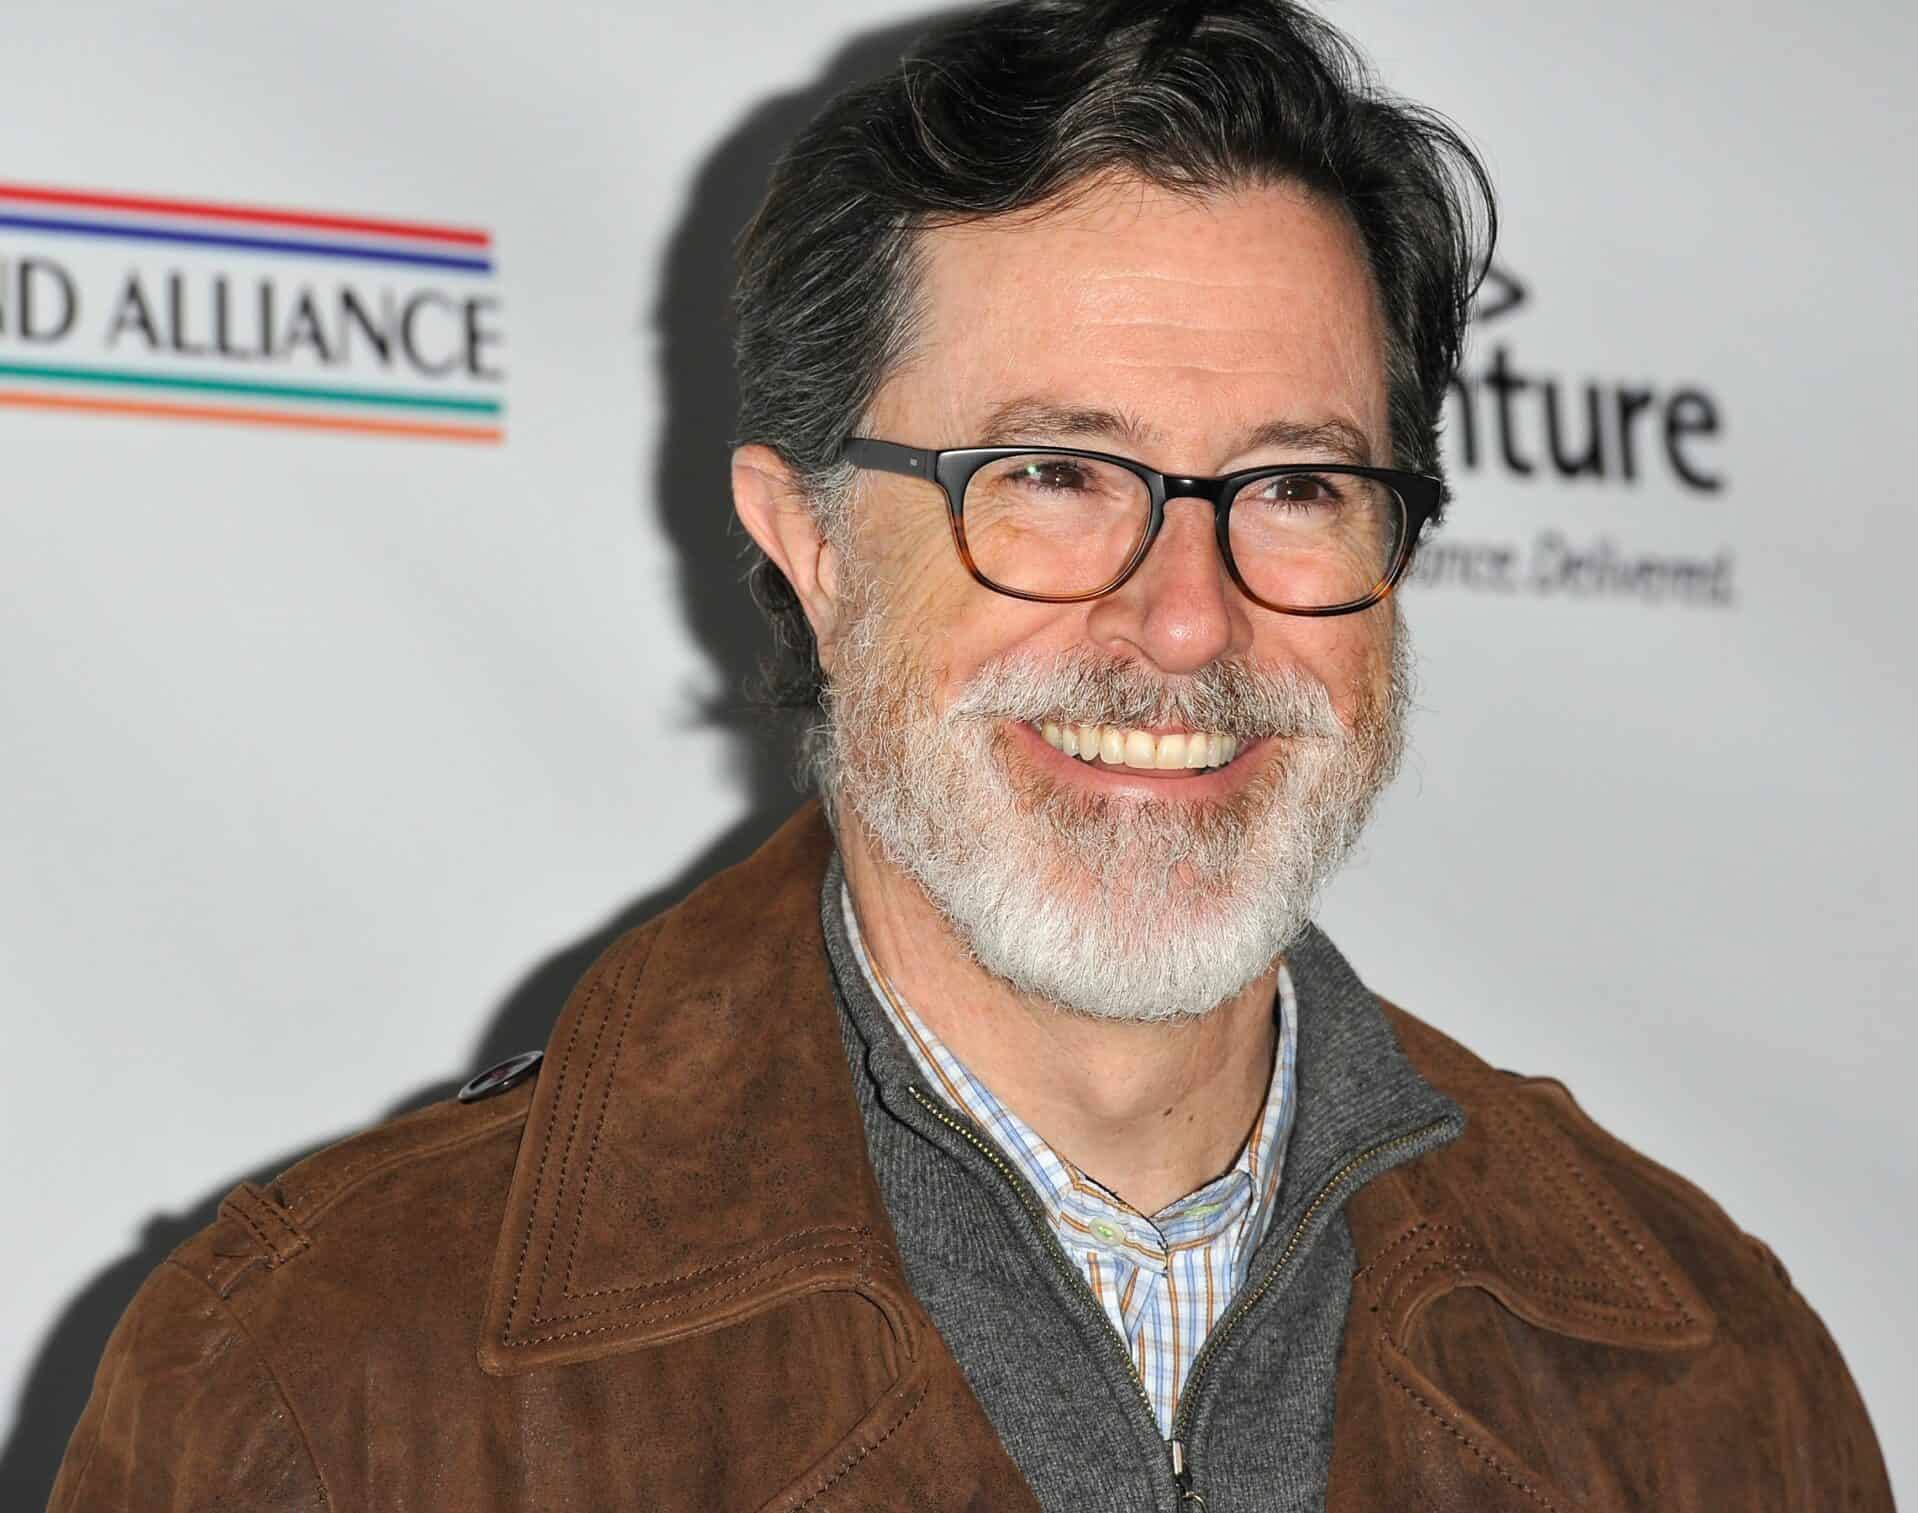 Stephen Colbert reportedly paid $515,000 for a property on Bellegrove Drive in Montclair, NJ.